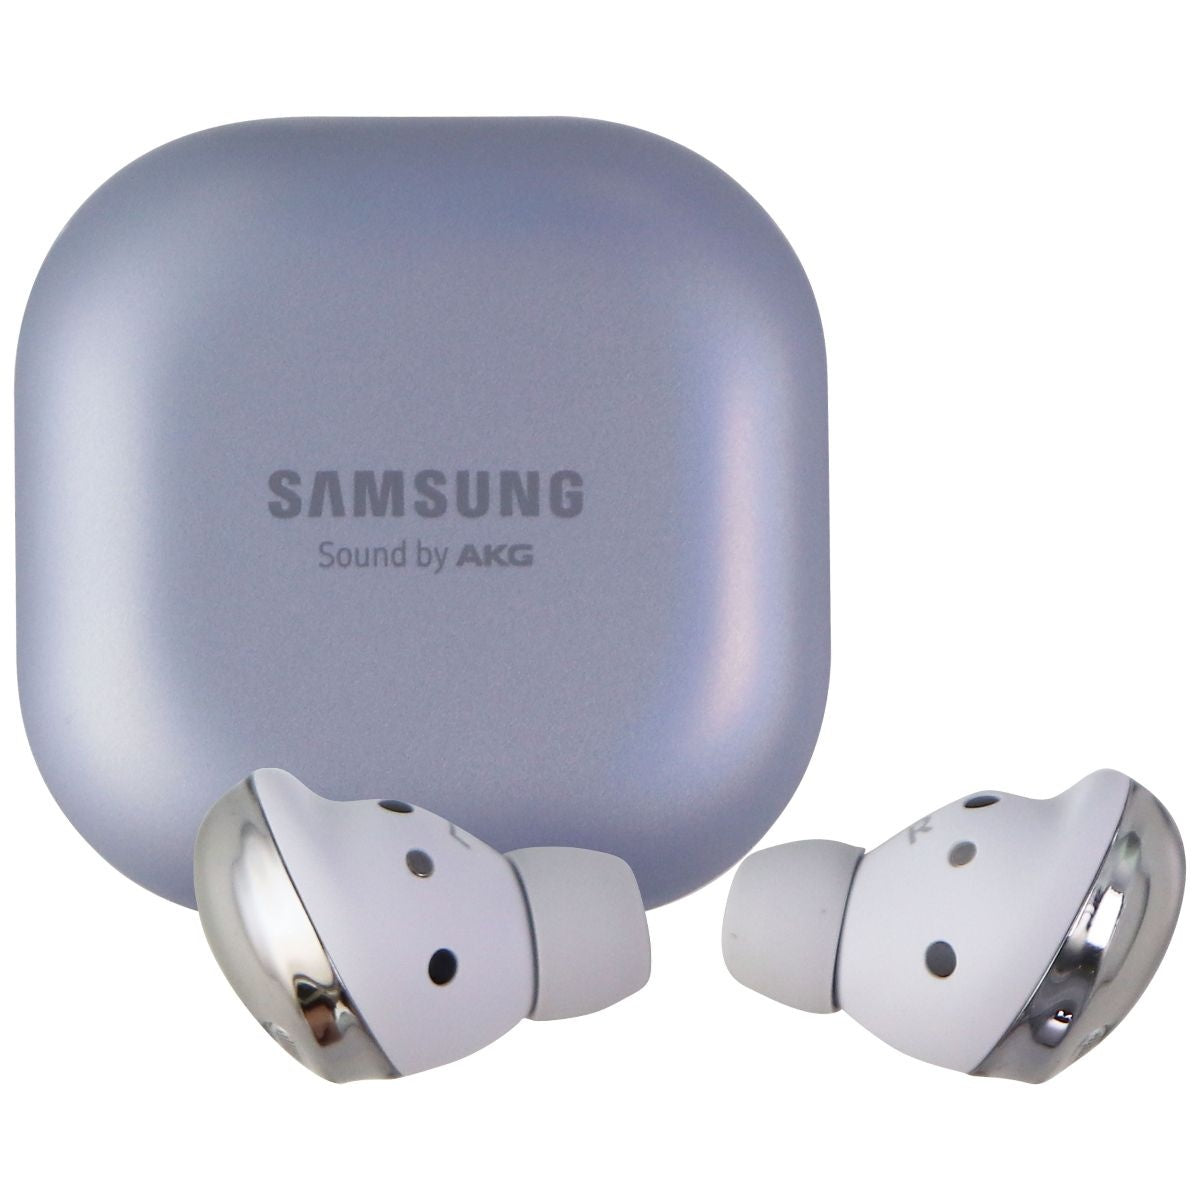 Samsung Galaxy Buds Pro Bluetooth Earbuds and Charging Case - Phantom Silver Portable Audio - Headphones Samsung    - Simple Cell Bulk Wholesale Pricing - USA Seller